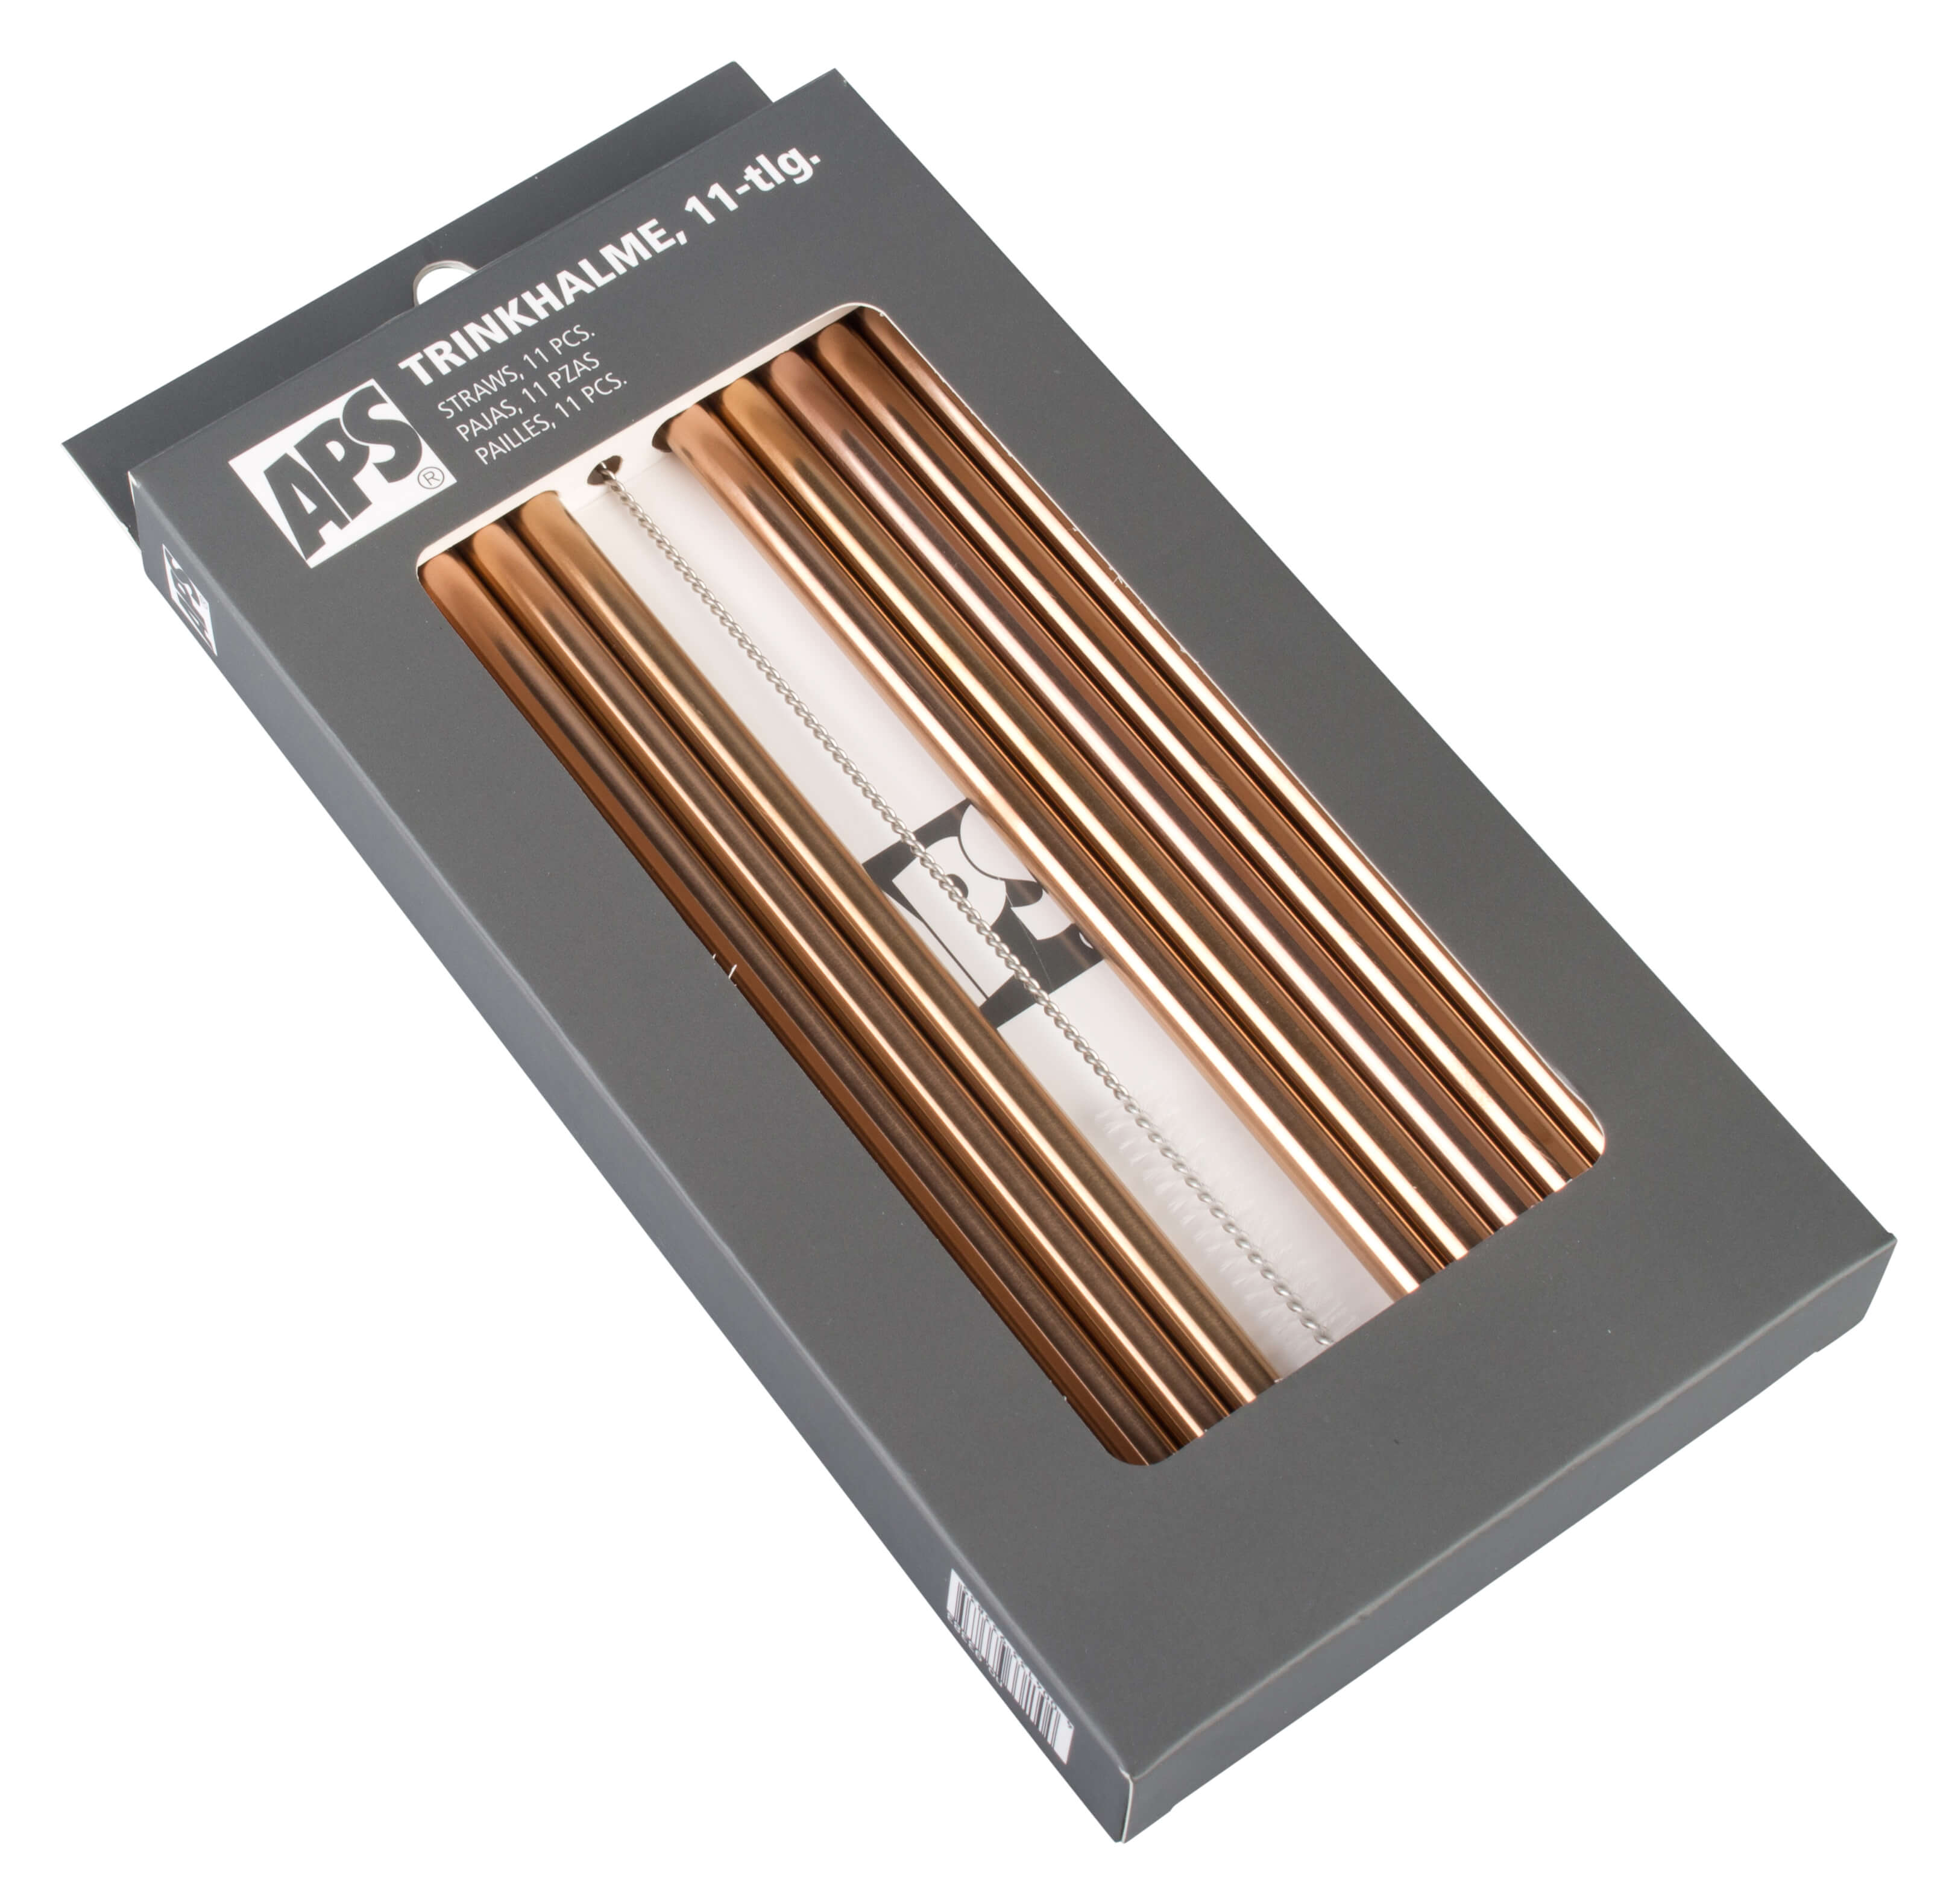 Drinking straws, stainless steel (8x215mm), copper-colored - 10 pcs. plus cleaning brush